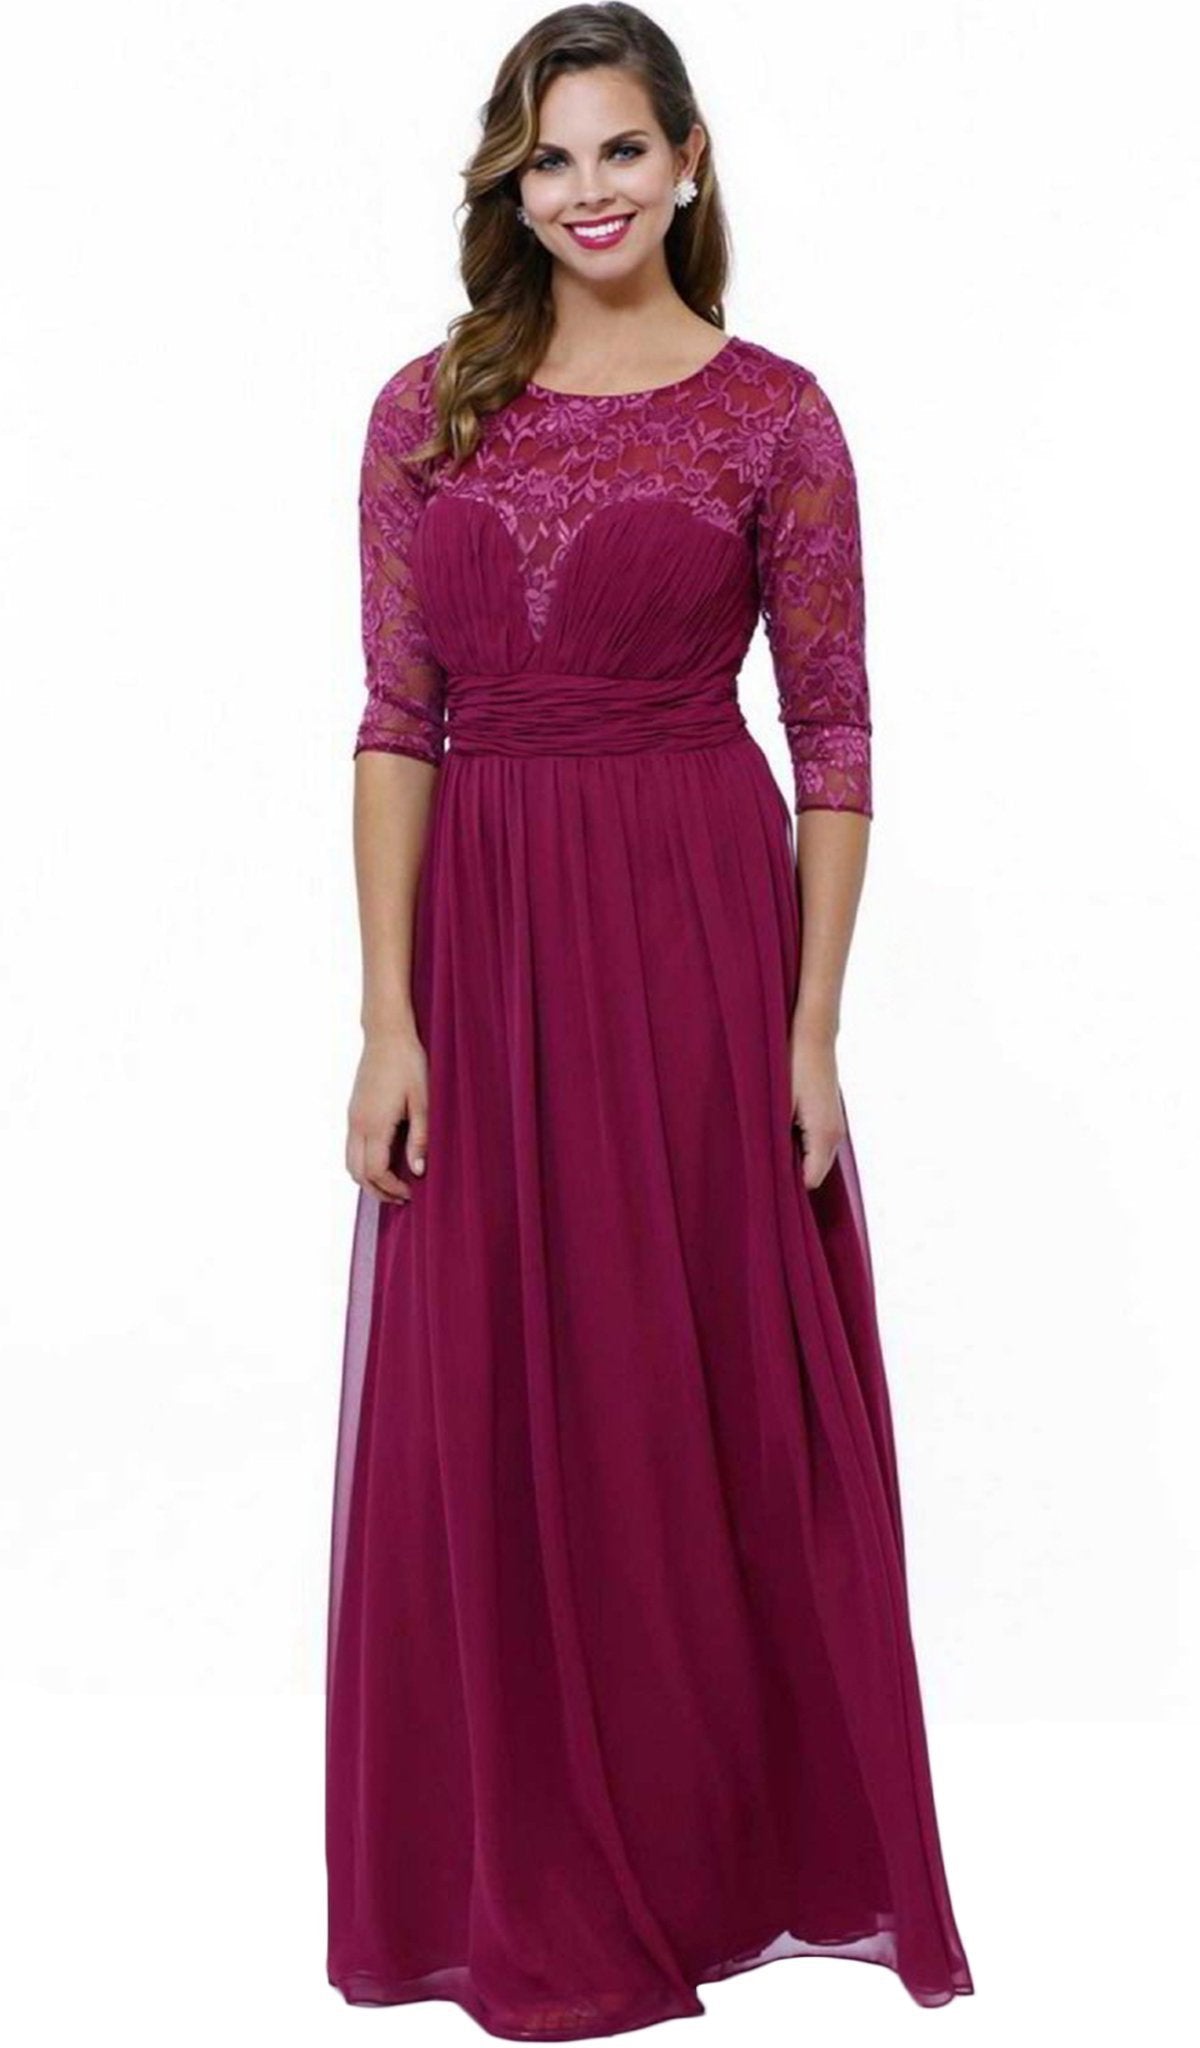 Nox Anabel - 5118 Illusion Sweetheart Long Evening Gown Special Occasion Dress M / Burgundy